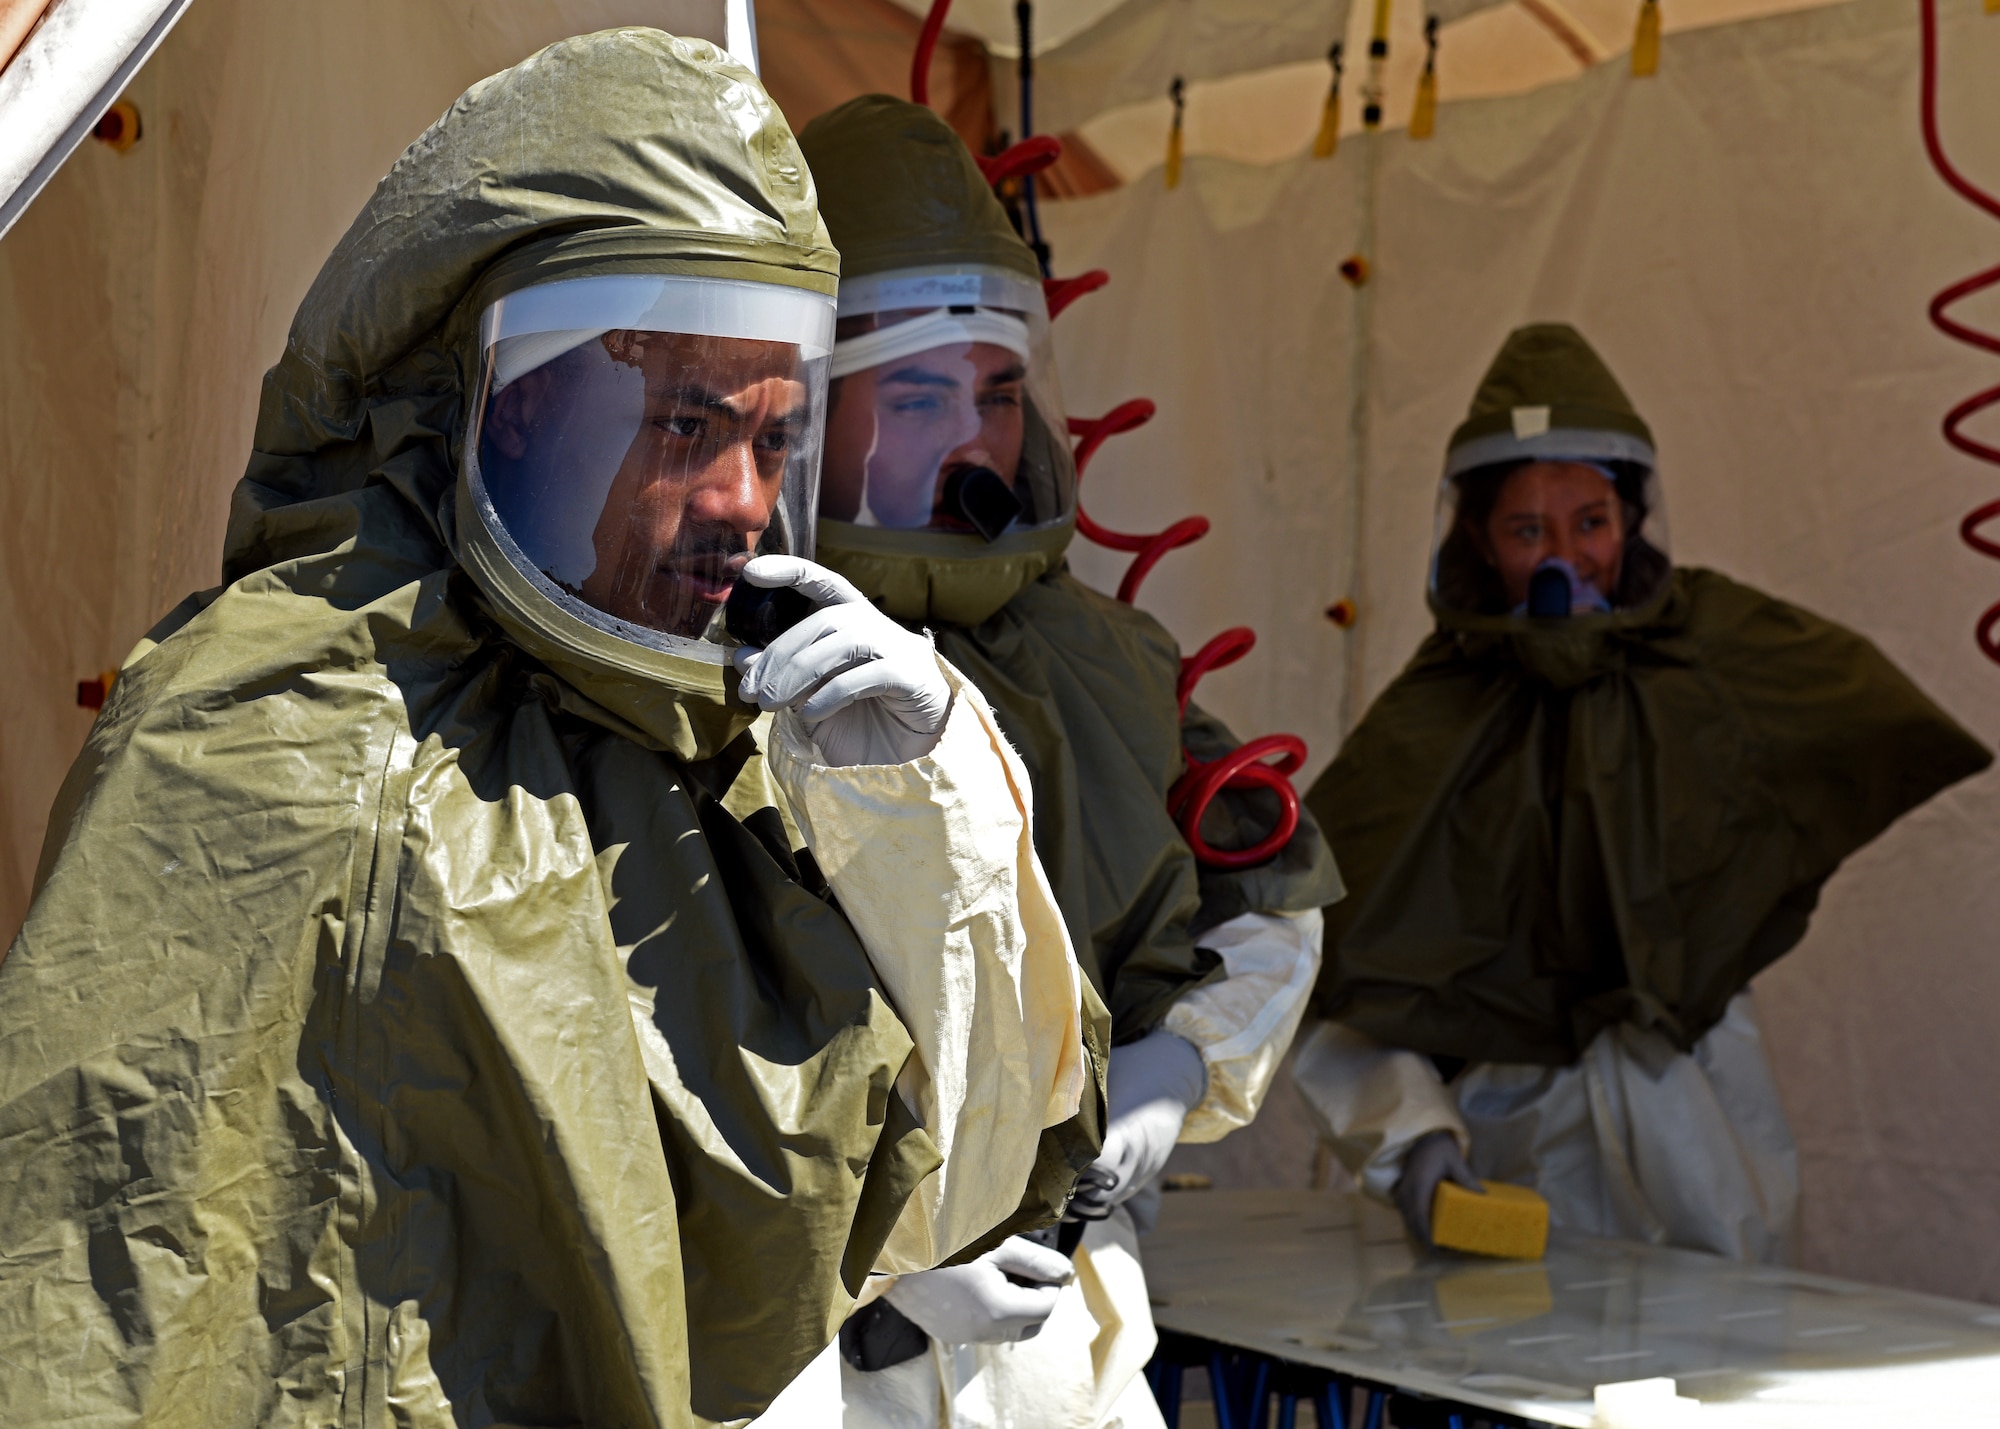 Personnel from the 17th Medical Group receive instructions during their medical in-place decontamination training at the Ross Clinic on Goodfellow Air Force Base, Texas, September 12, 2019. Personnel train on how to properly don their protective gear and how to communicate to disinfect their patients. (U.S. Air Force photo by Airman 1st Class Robyn Hunsinger/Released)